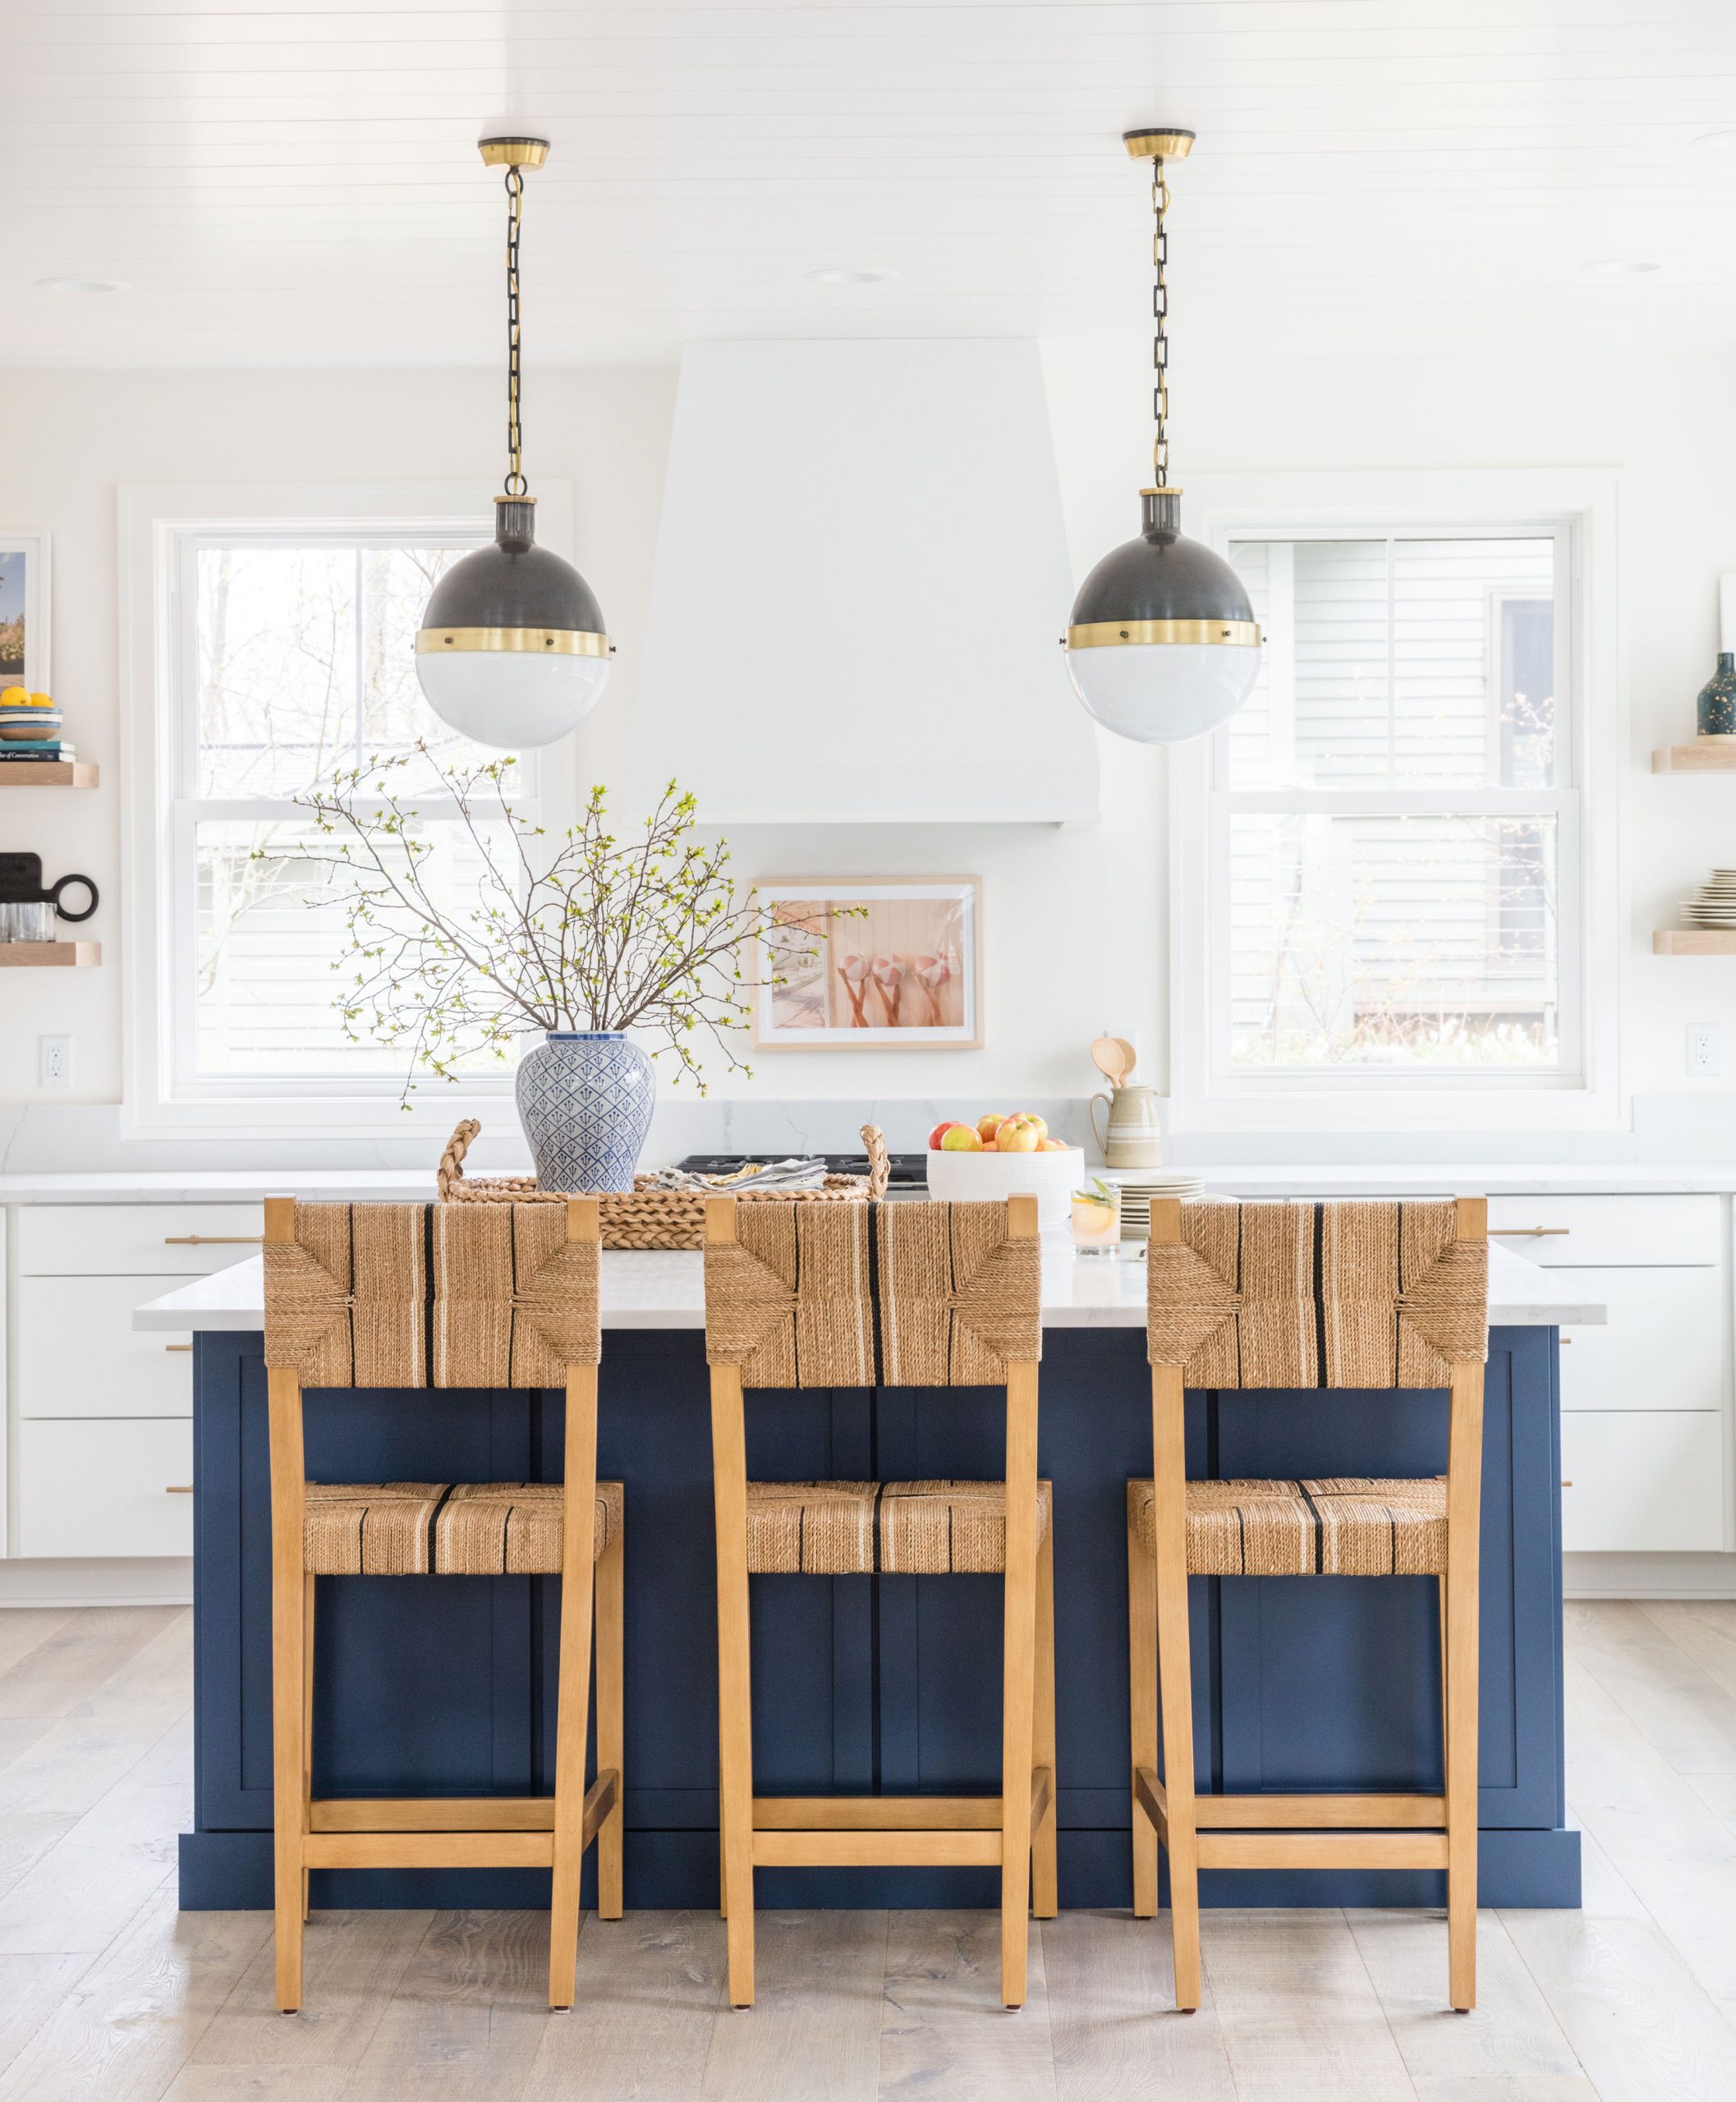 Kitchen designed by Kate Lester Interiors